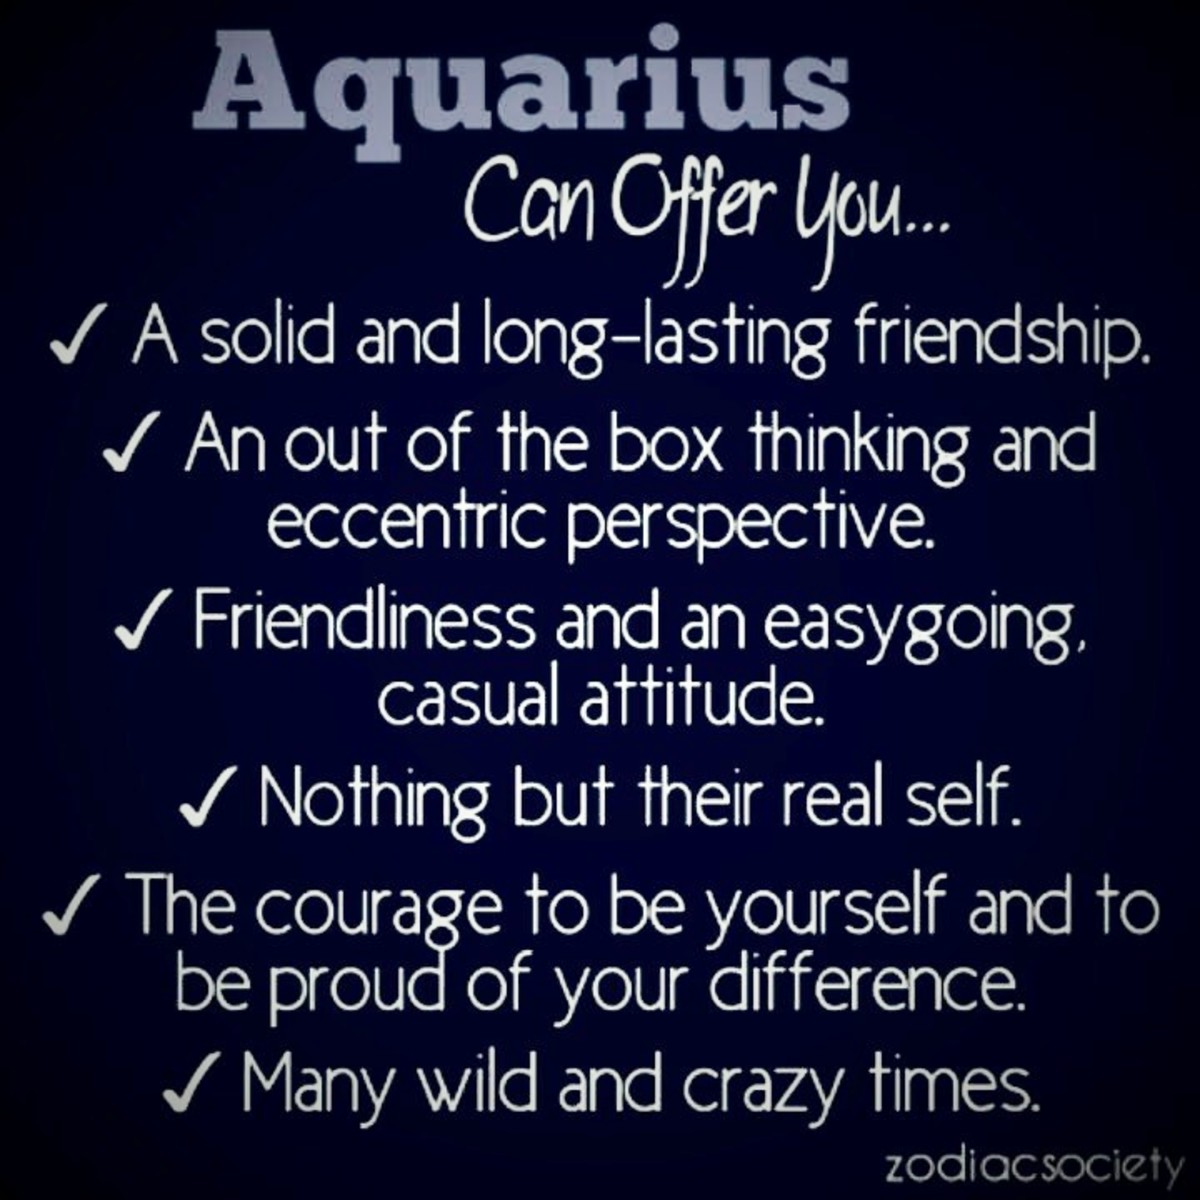 Is man when angry aquarius How Each